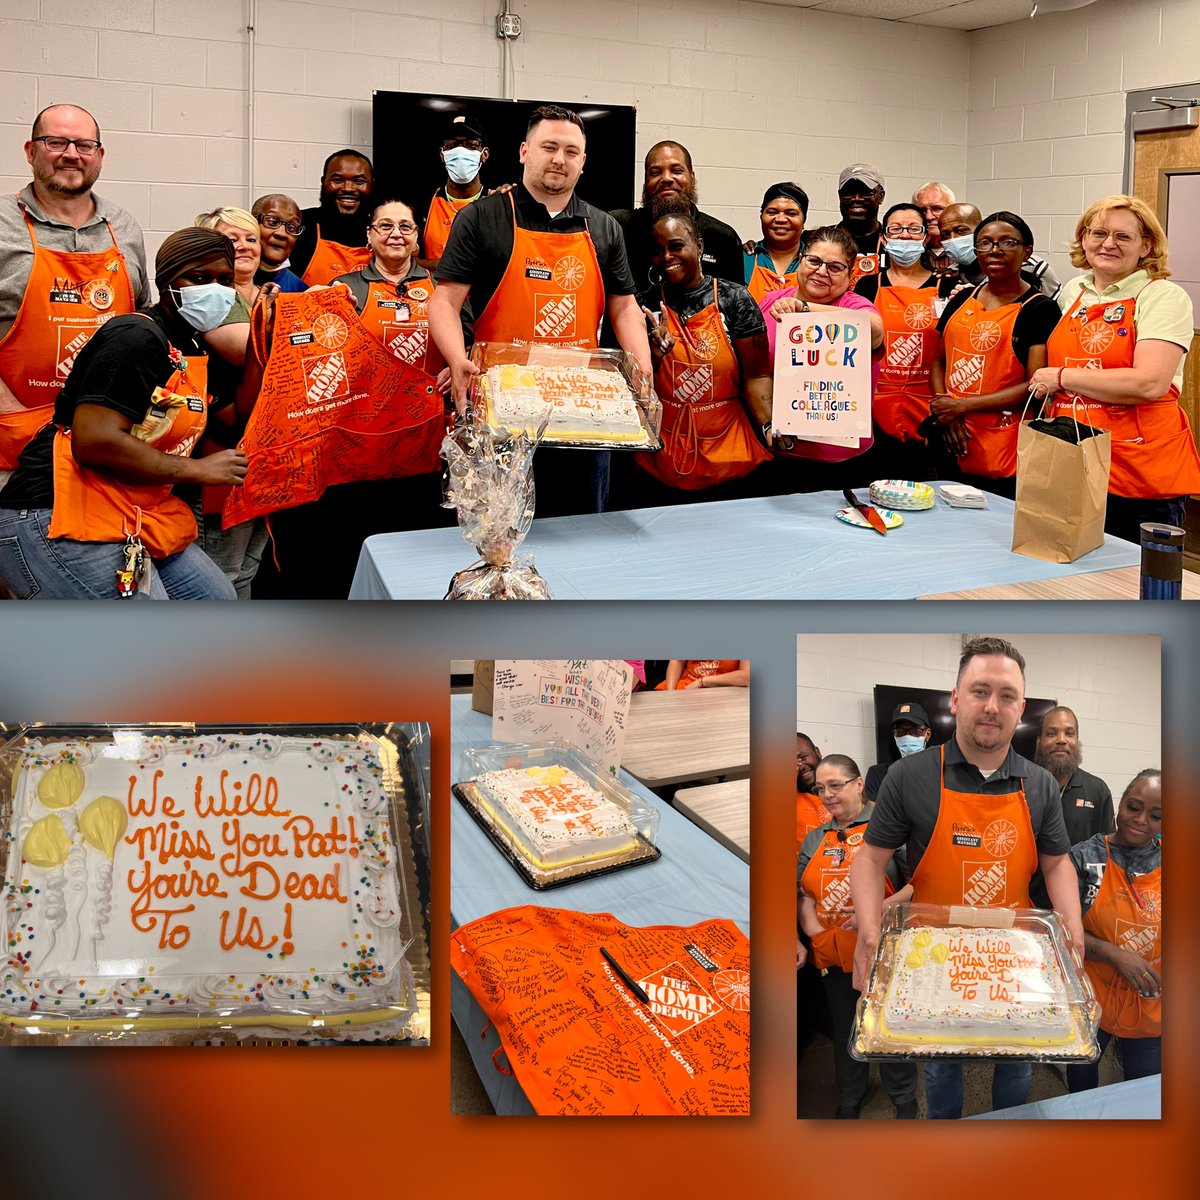 From One ☝️ “ Fearless Leader ” To The Next Pat SASM @patgall41 your team at @THD4112 Are Wishing You The Best of Luck 🍀 In Your New Store 🏬 @THD4114 You Will Be Missed 😪 We Cannot Wait To See Your Growth📈@MattWichner @MaryLuk33744050 @jonbaumann304 @JessieWhiteman2